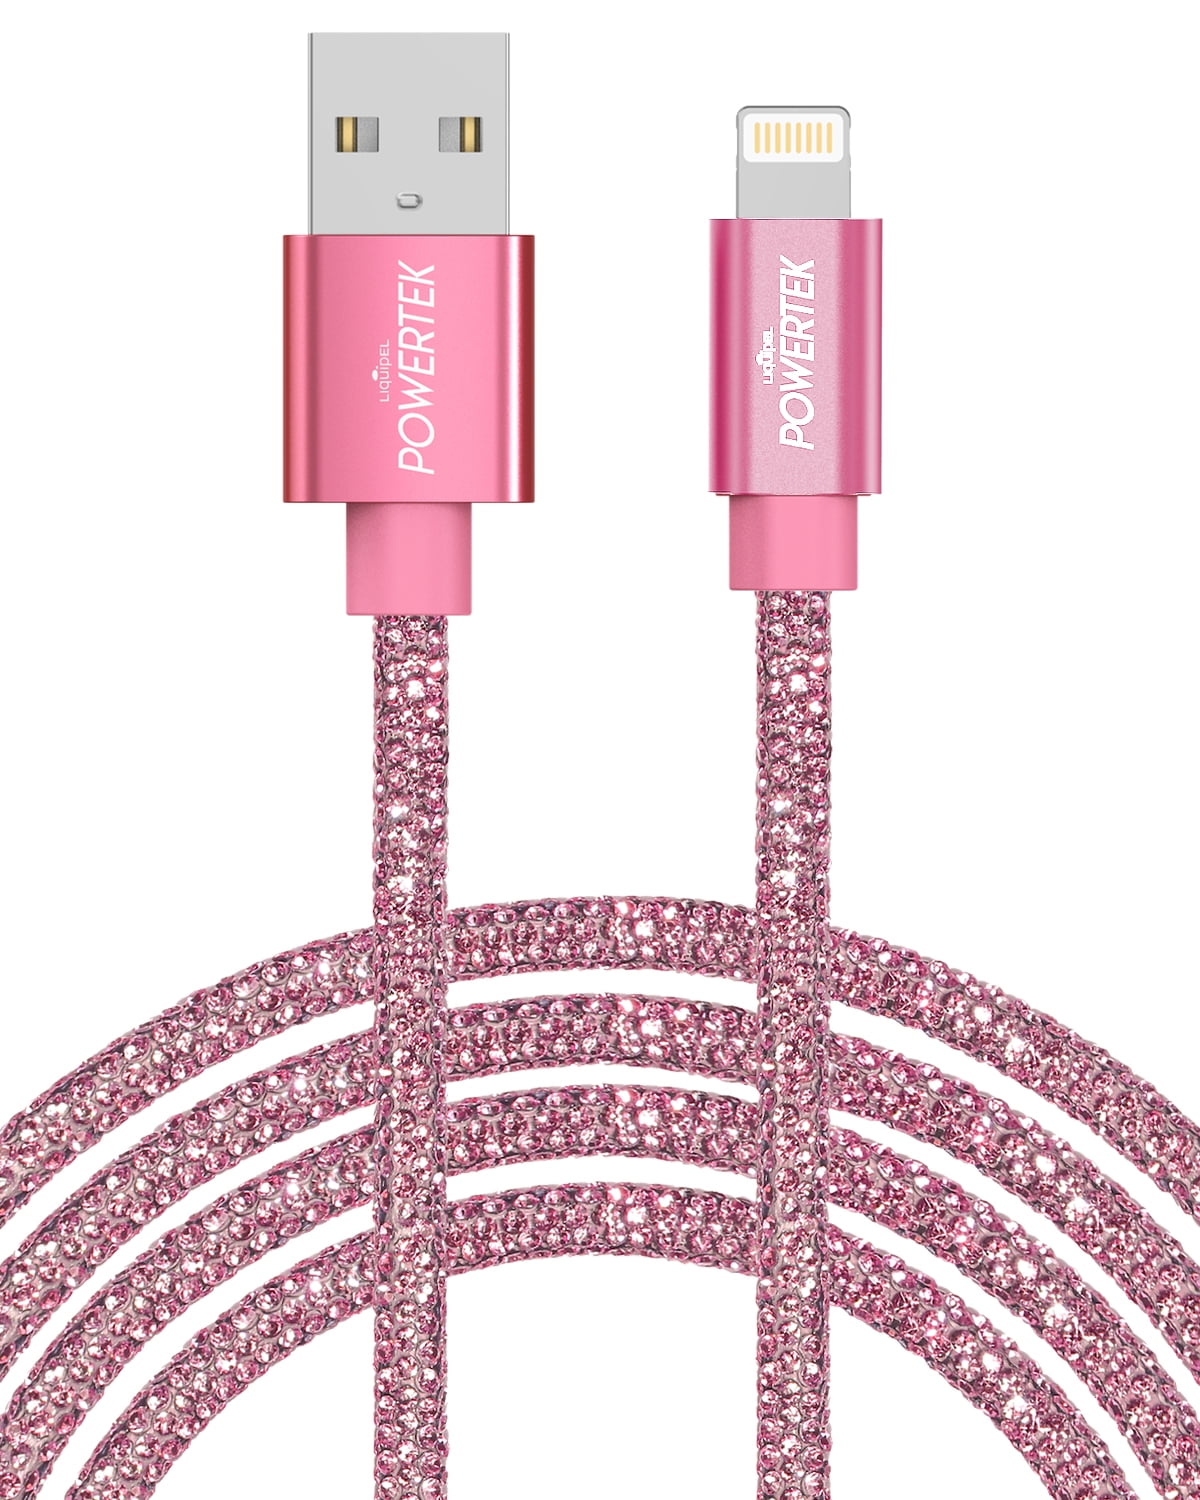 Liquipel Powertek iPad & iPhone Charger Cable, Fast Charging 6ft MFI  Certified Lightning to USB Cord, Diamond Shine Pink 